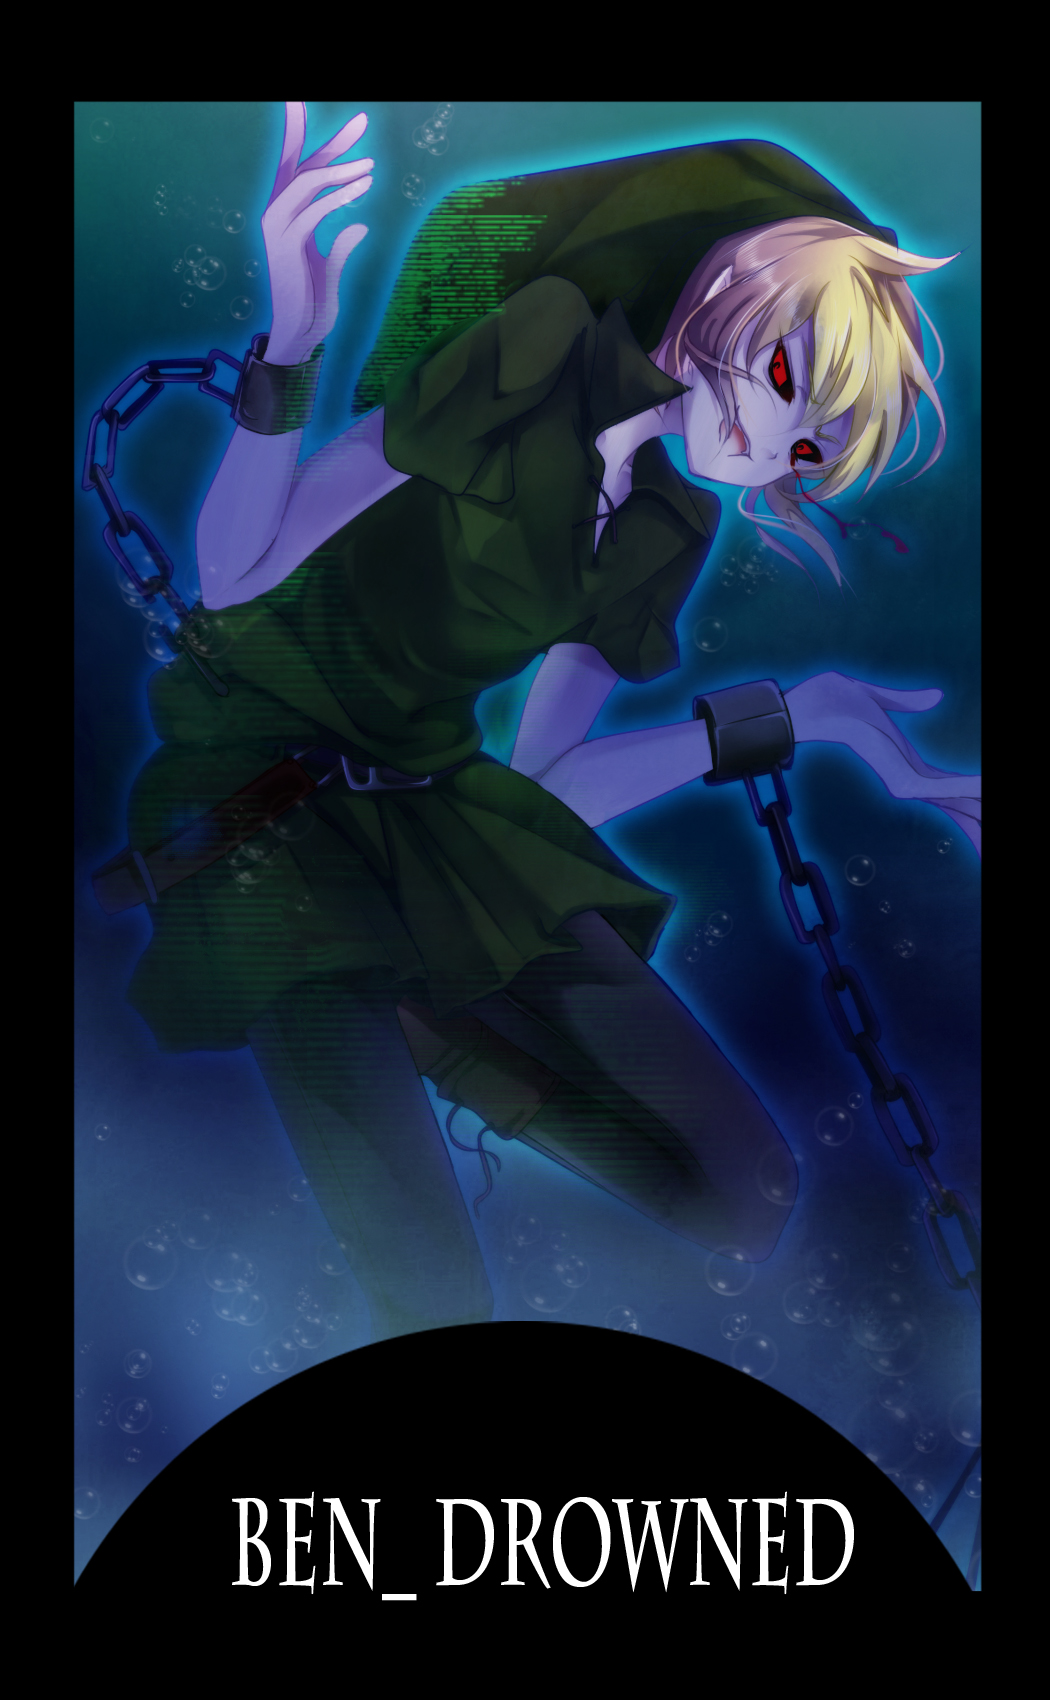 Ben drowned  link wallpaper by lucky4h  Download on ZEDGE  f124